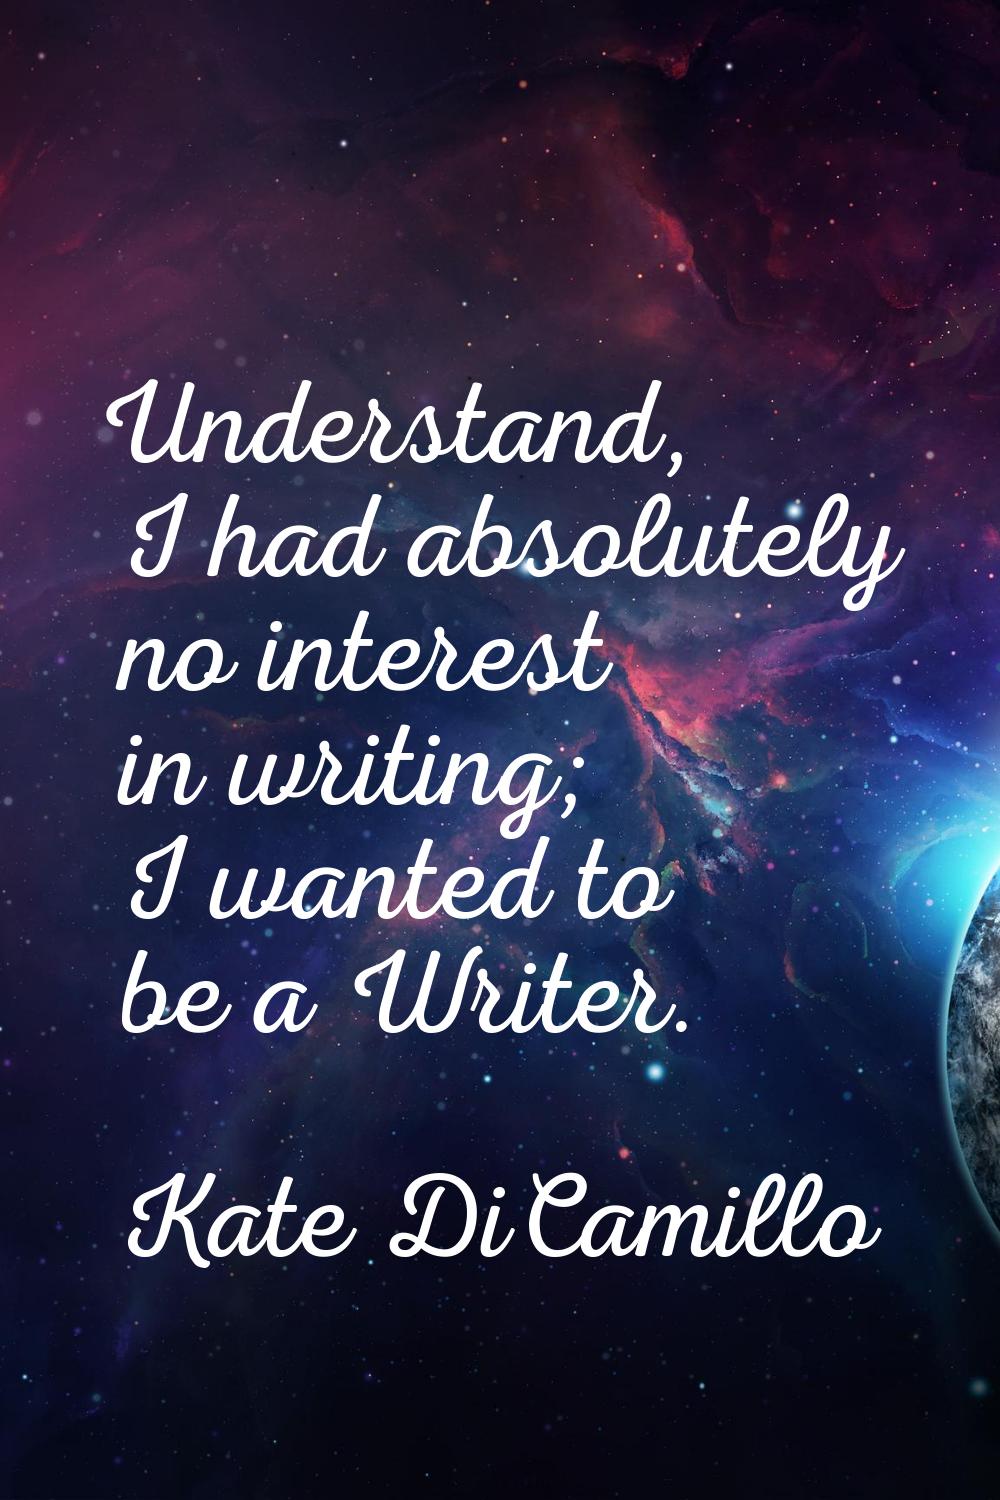 Understand, I had absolutely no interest in writing; I wanted to be a Writer.